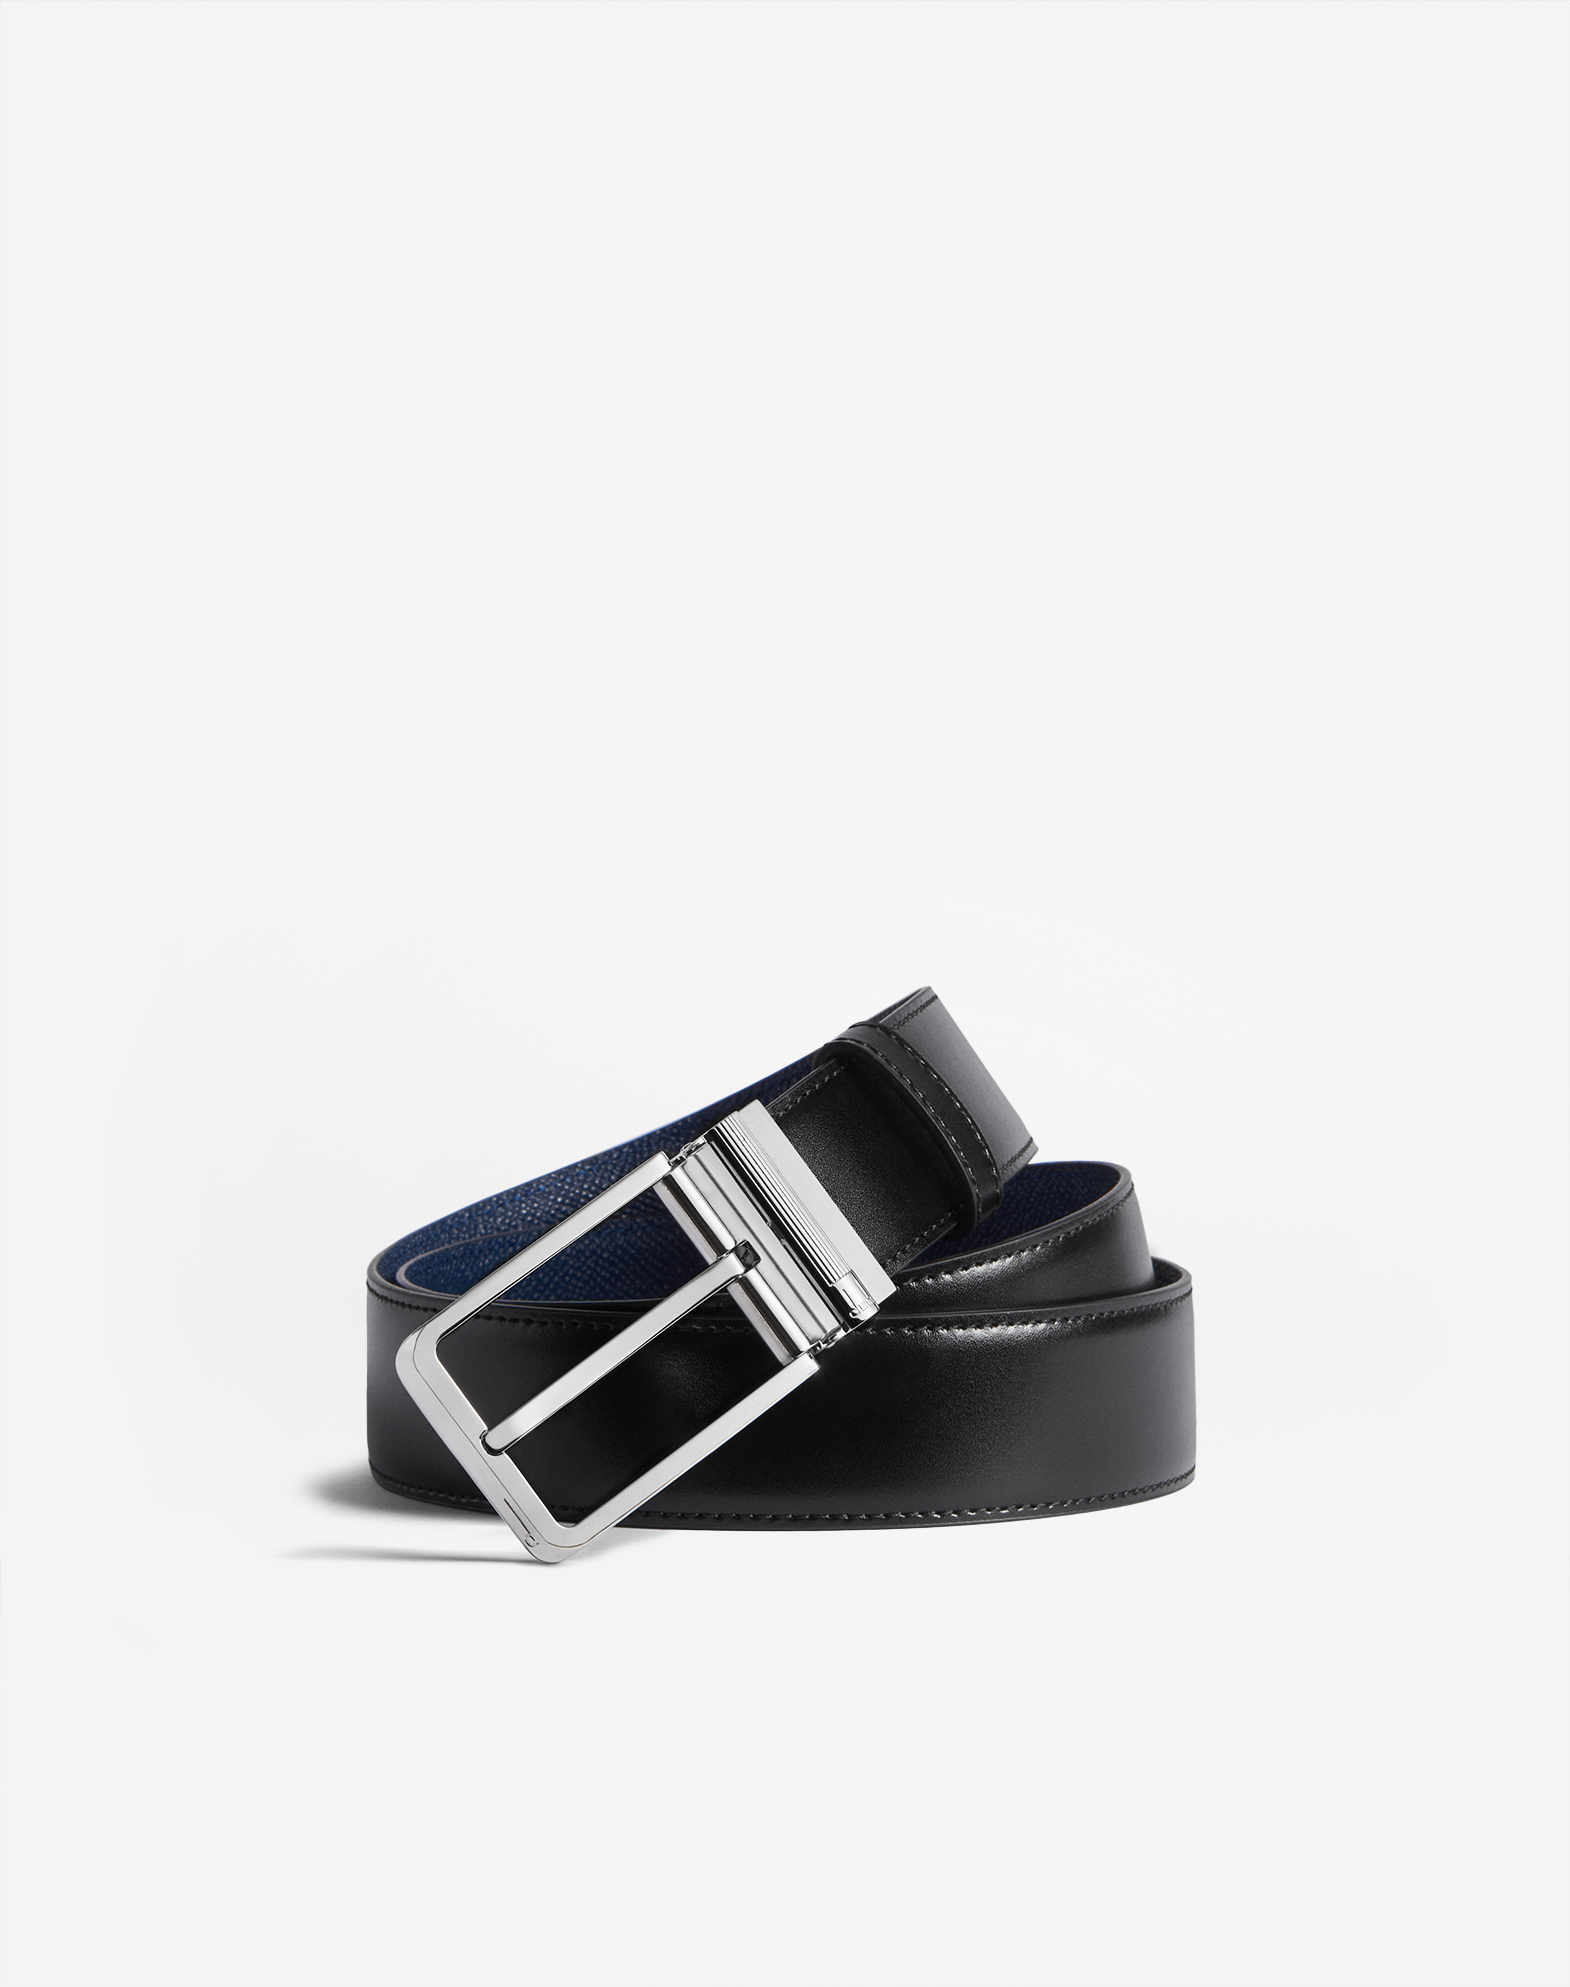 Dunhill Reversible 35mm Rounded Roller Buckle Smooth Leather Belt In Black